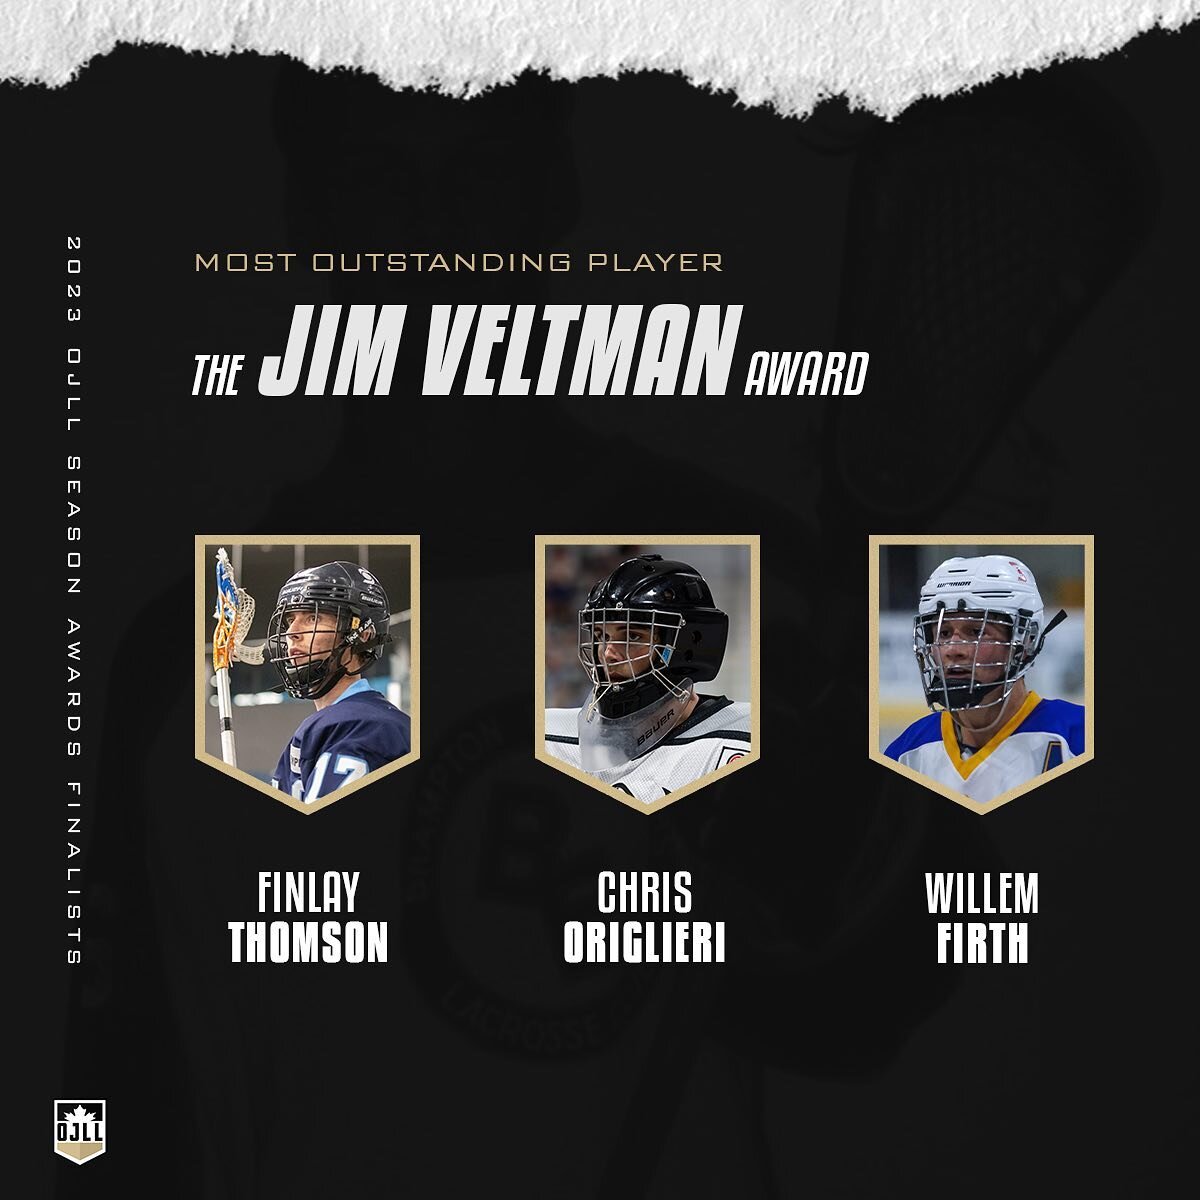 The finalists for the Jim Veltman Award, presented annually to the Most Outstanding Player:

🏆 Finlay Thomson (@MimicoJrALax)
🏆 Chris Origlieri (@JrANorthmen)
🏆 Willem Firth (@BeachesJrA)

#OJLLAwards will be presented during the Ontario Final Aug